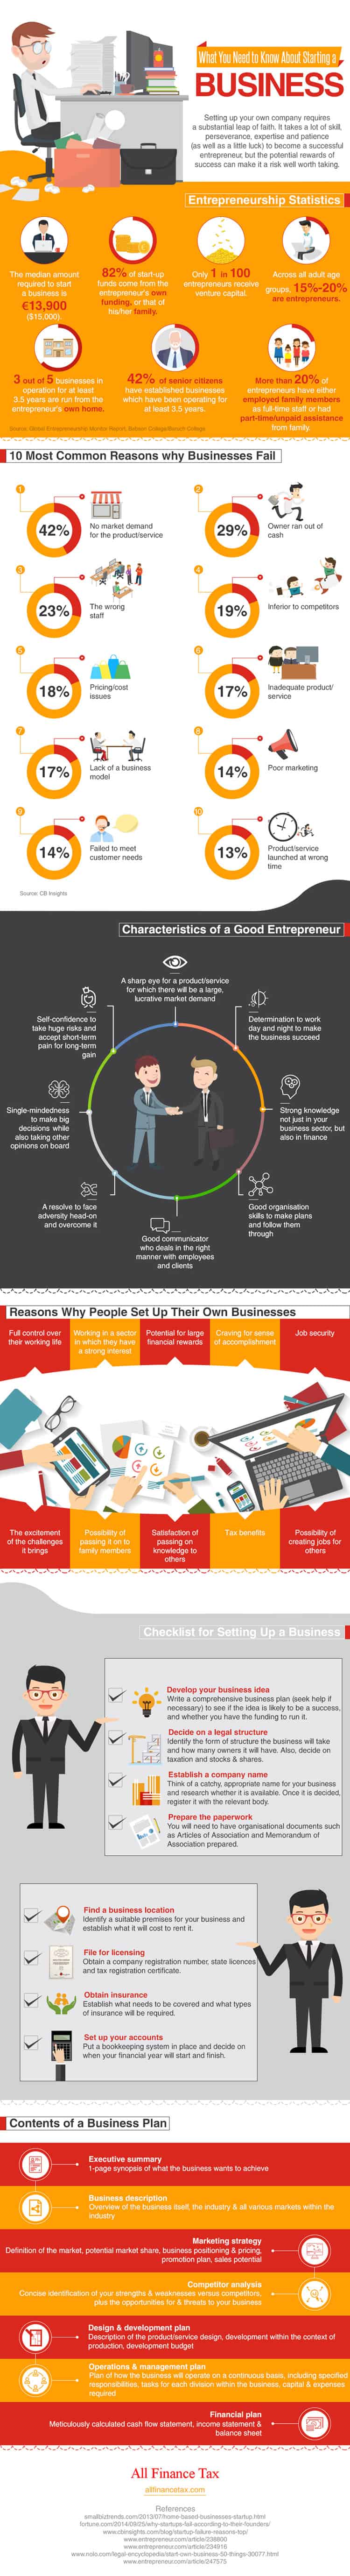 what-you-need-to-know-about-starting-a-business-infographic